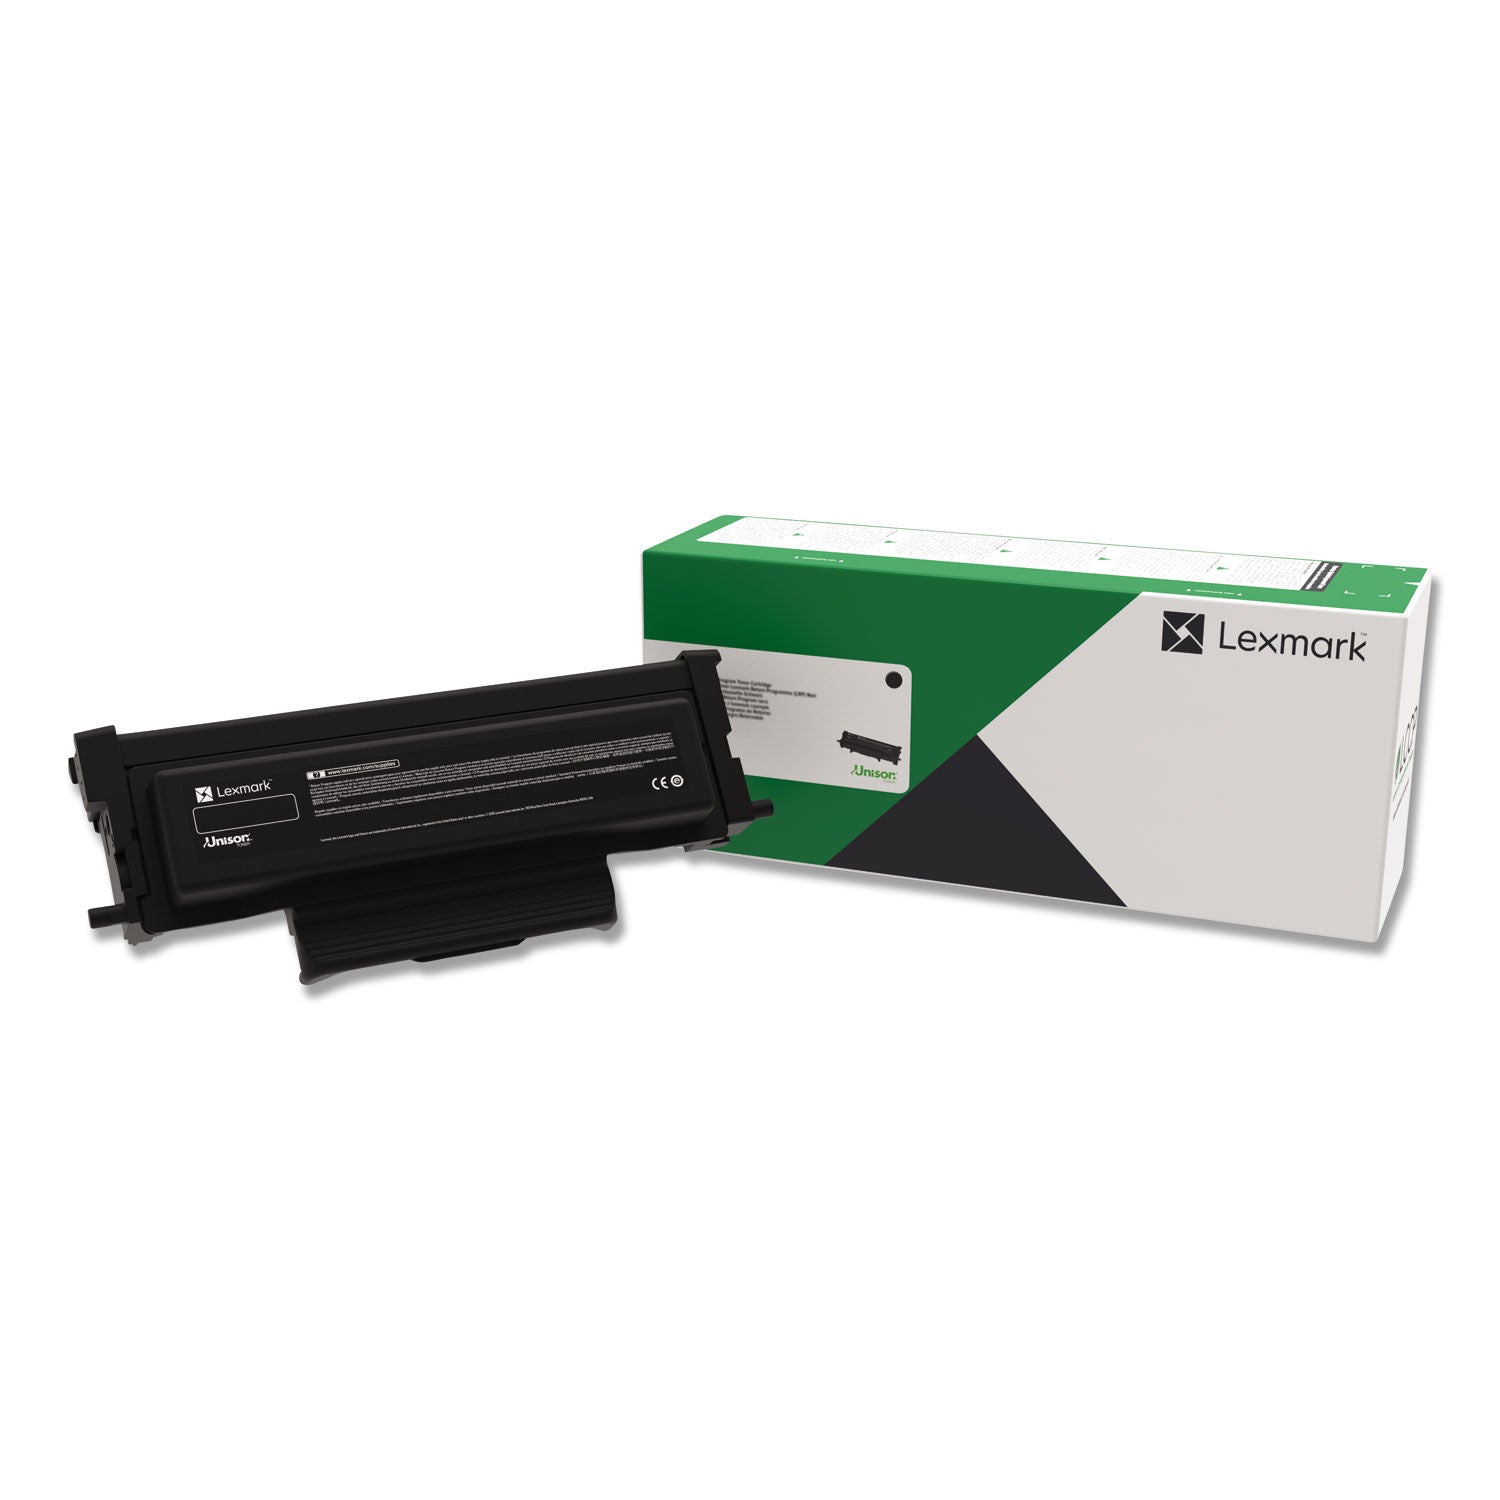 OEM Lexmark B221H00 High Yield Toner Cartridge for B2236, MB2236 [3,000 Pages]